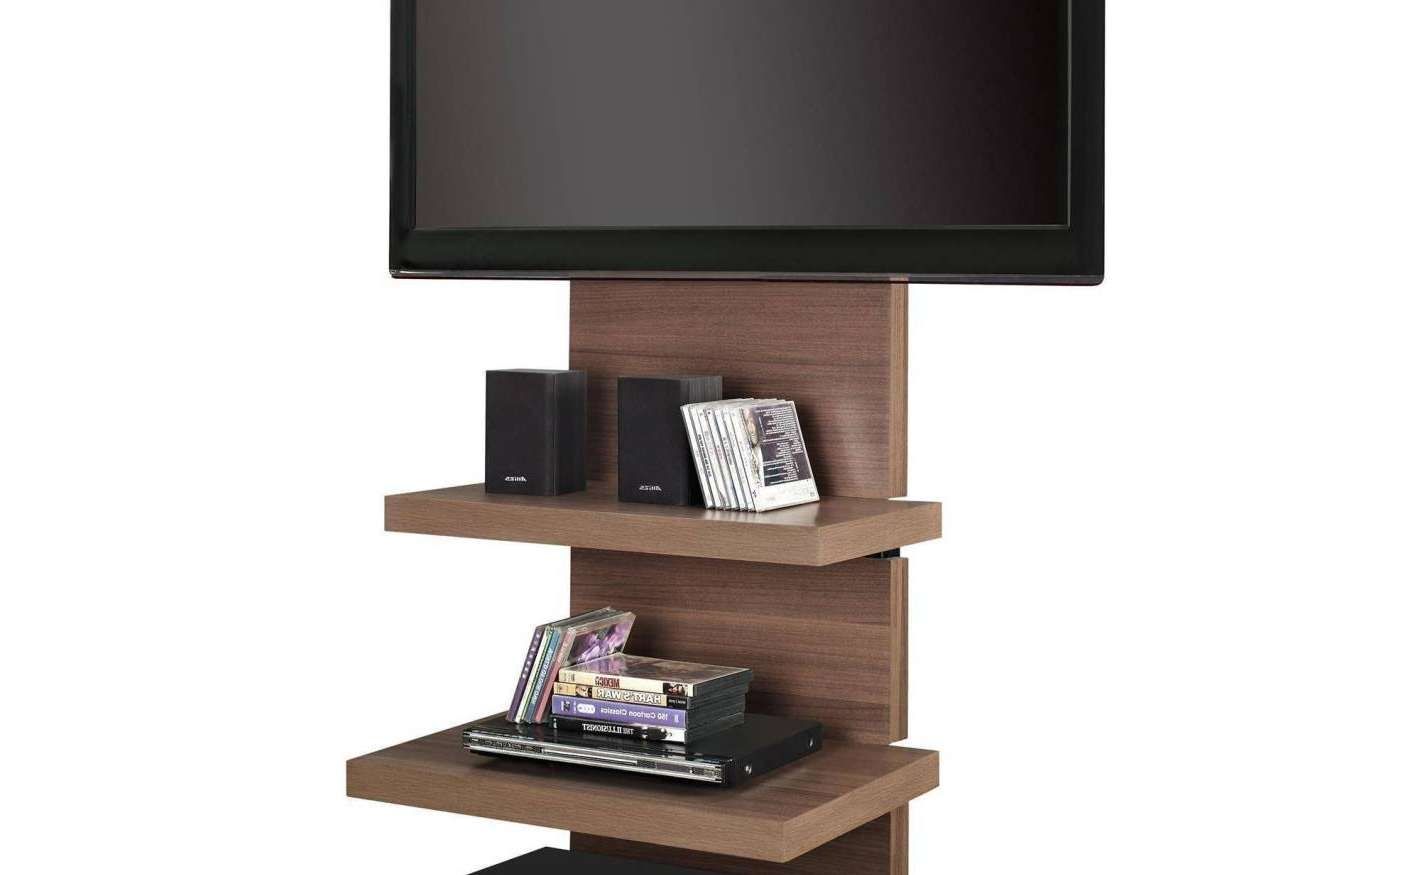 Tv : Engaging 65 Inch Tv Stands With Integrated Mount Gripping 65 Pertaining To 65 Inch Tv Stands With Integrated Mount (View 8 of 15)